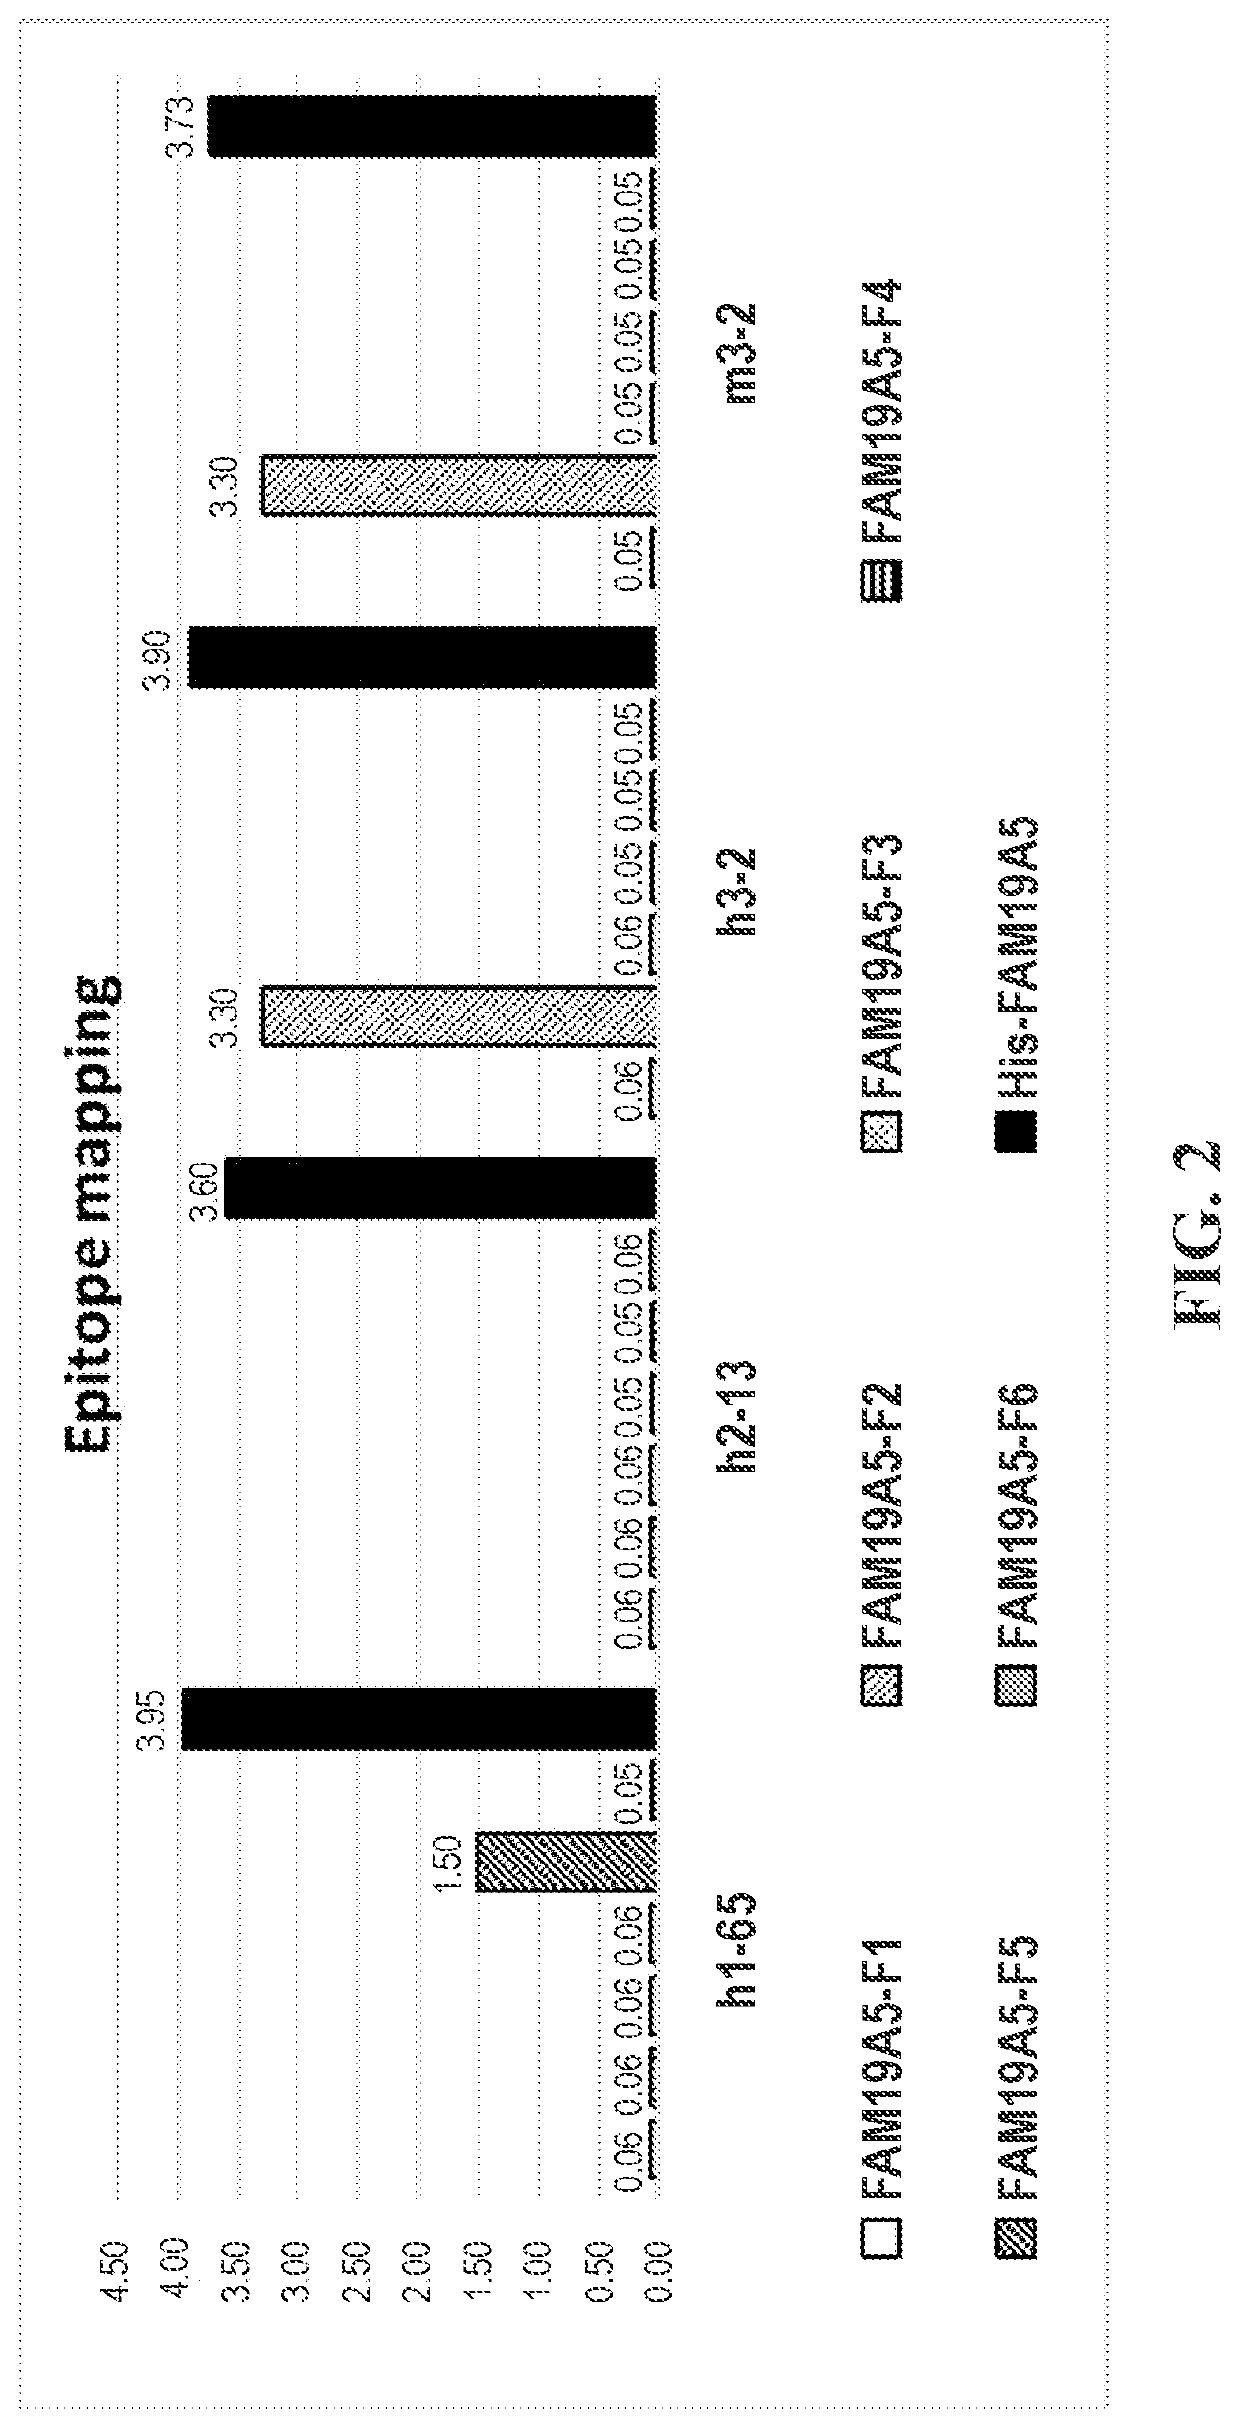 Anti-fam19a5 antibodies and uses thereof